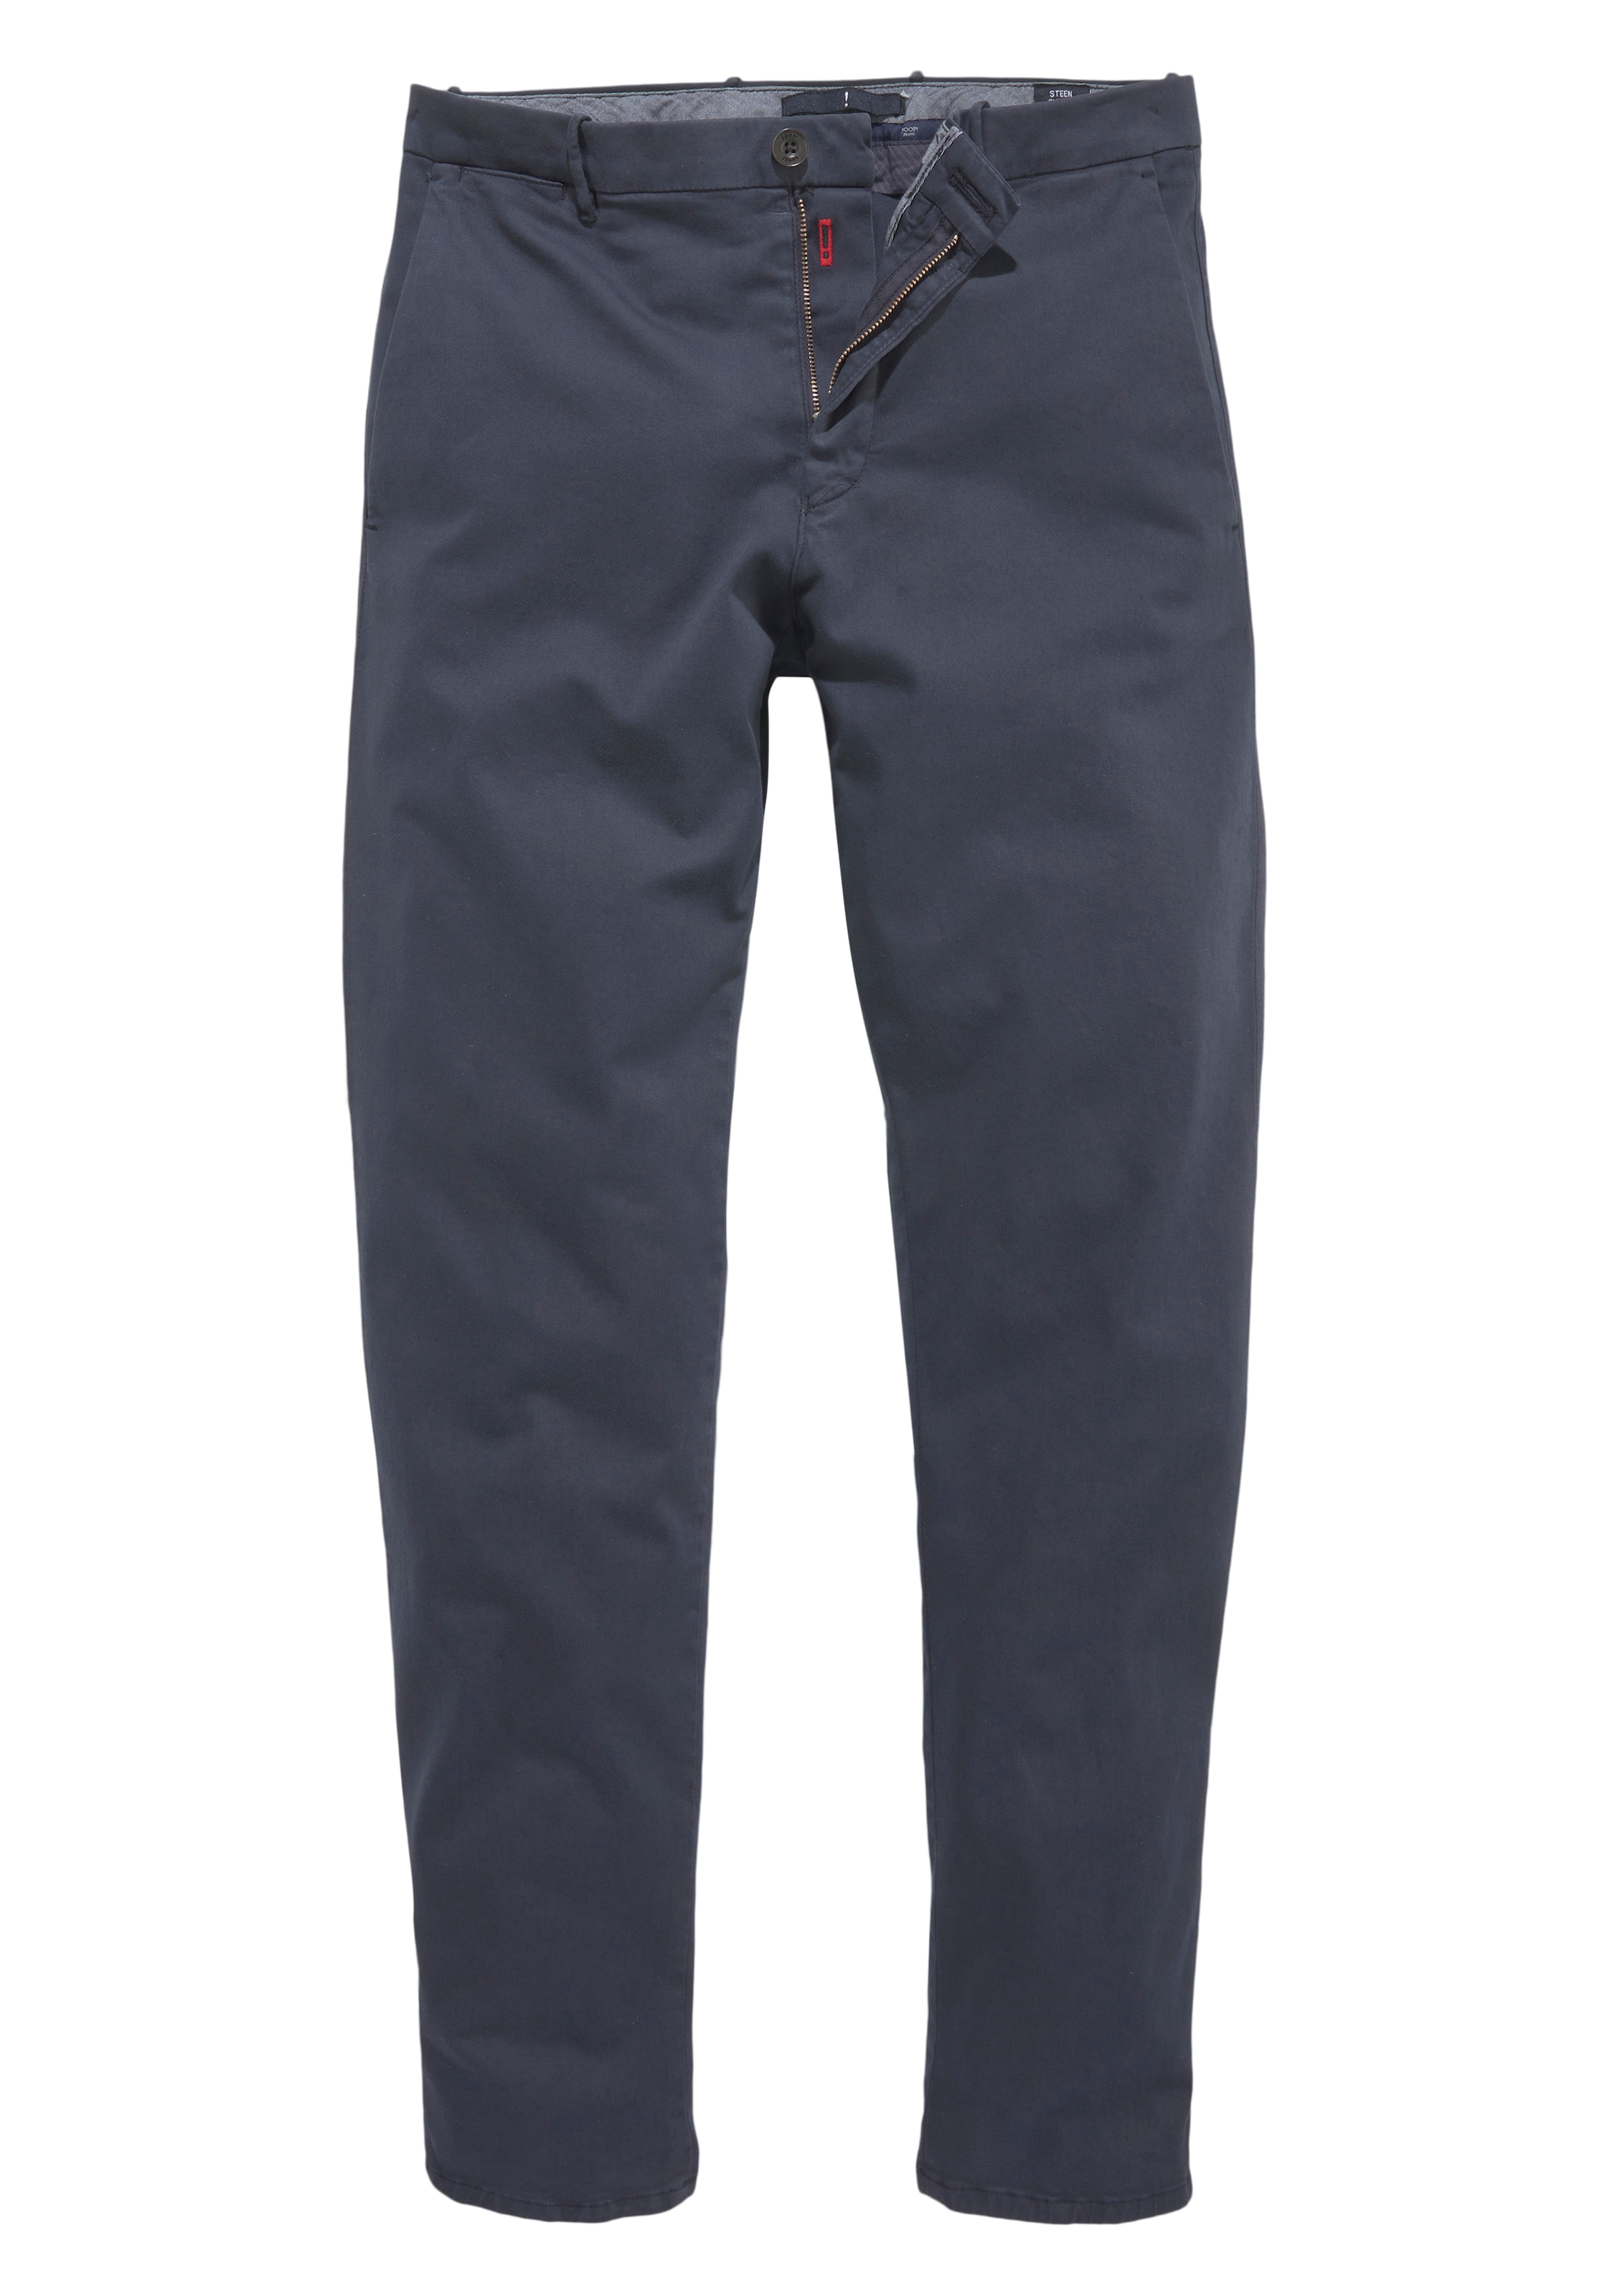 OTTO Chinohose Joop Jeans bei »Steen« online